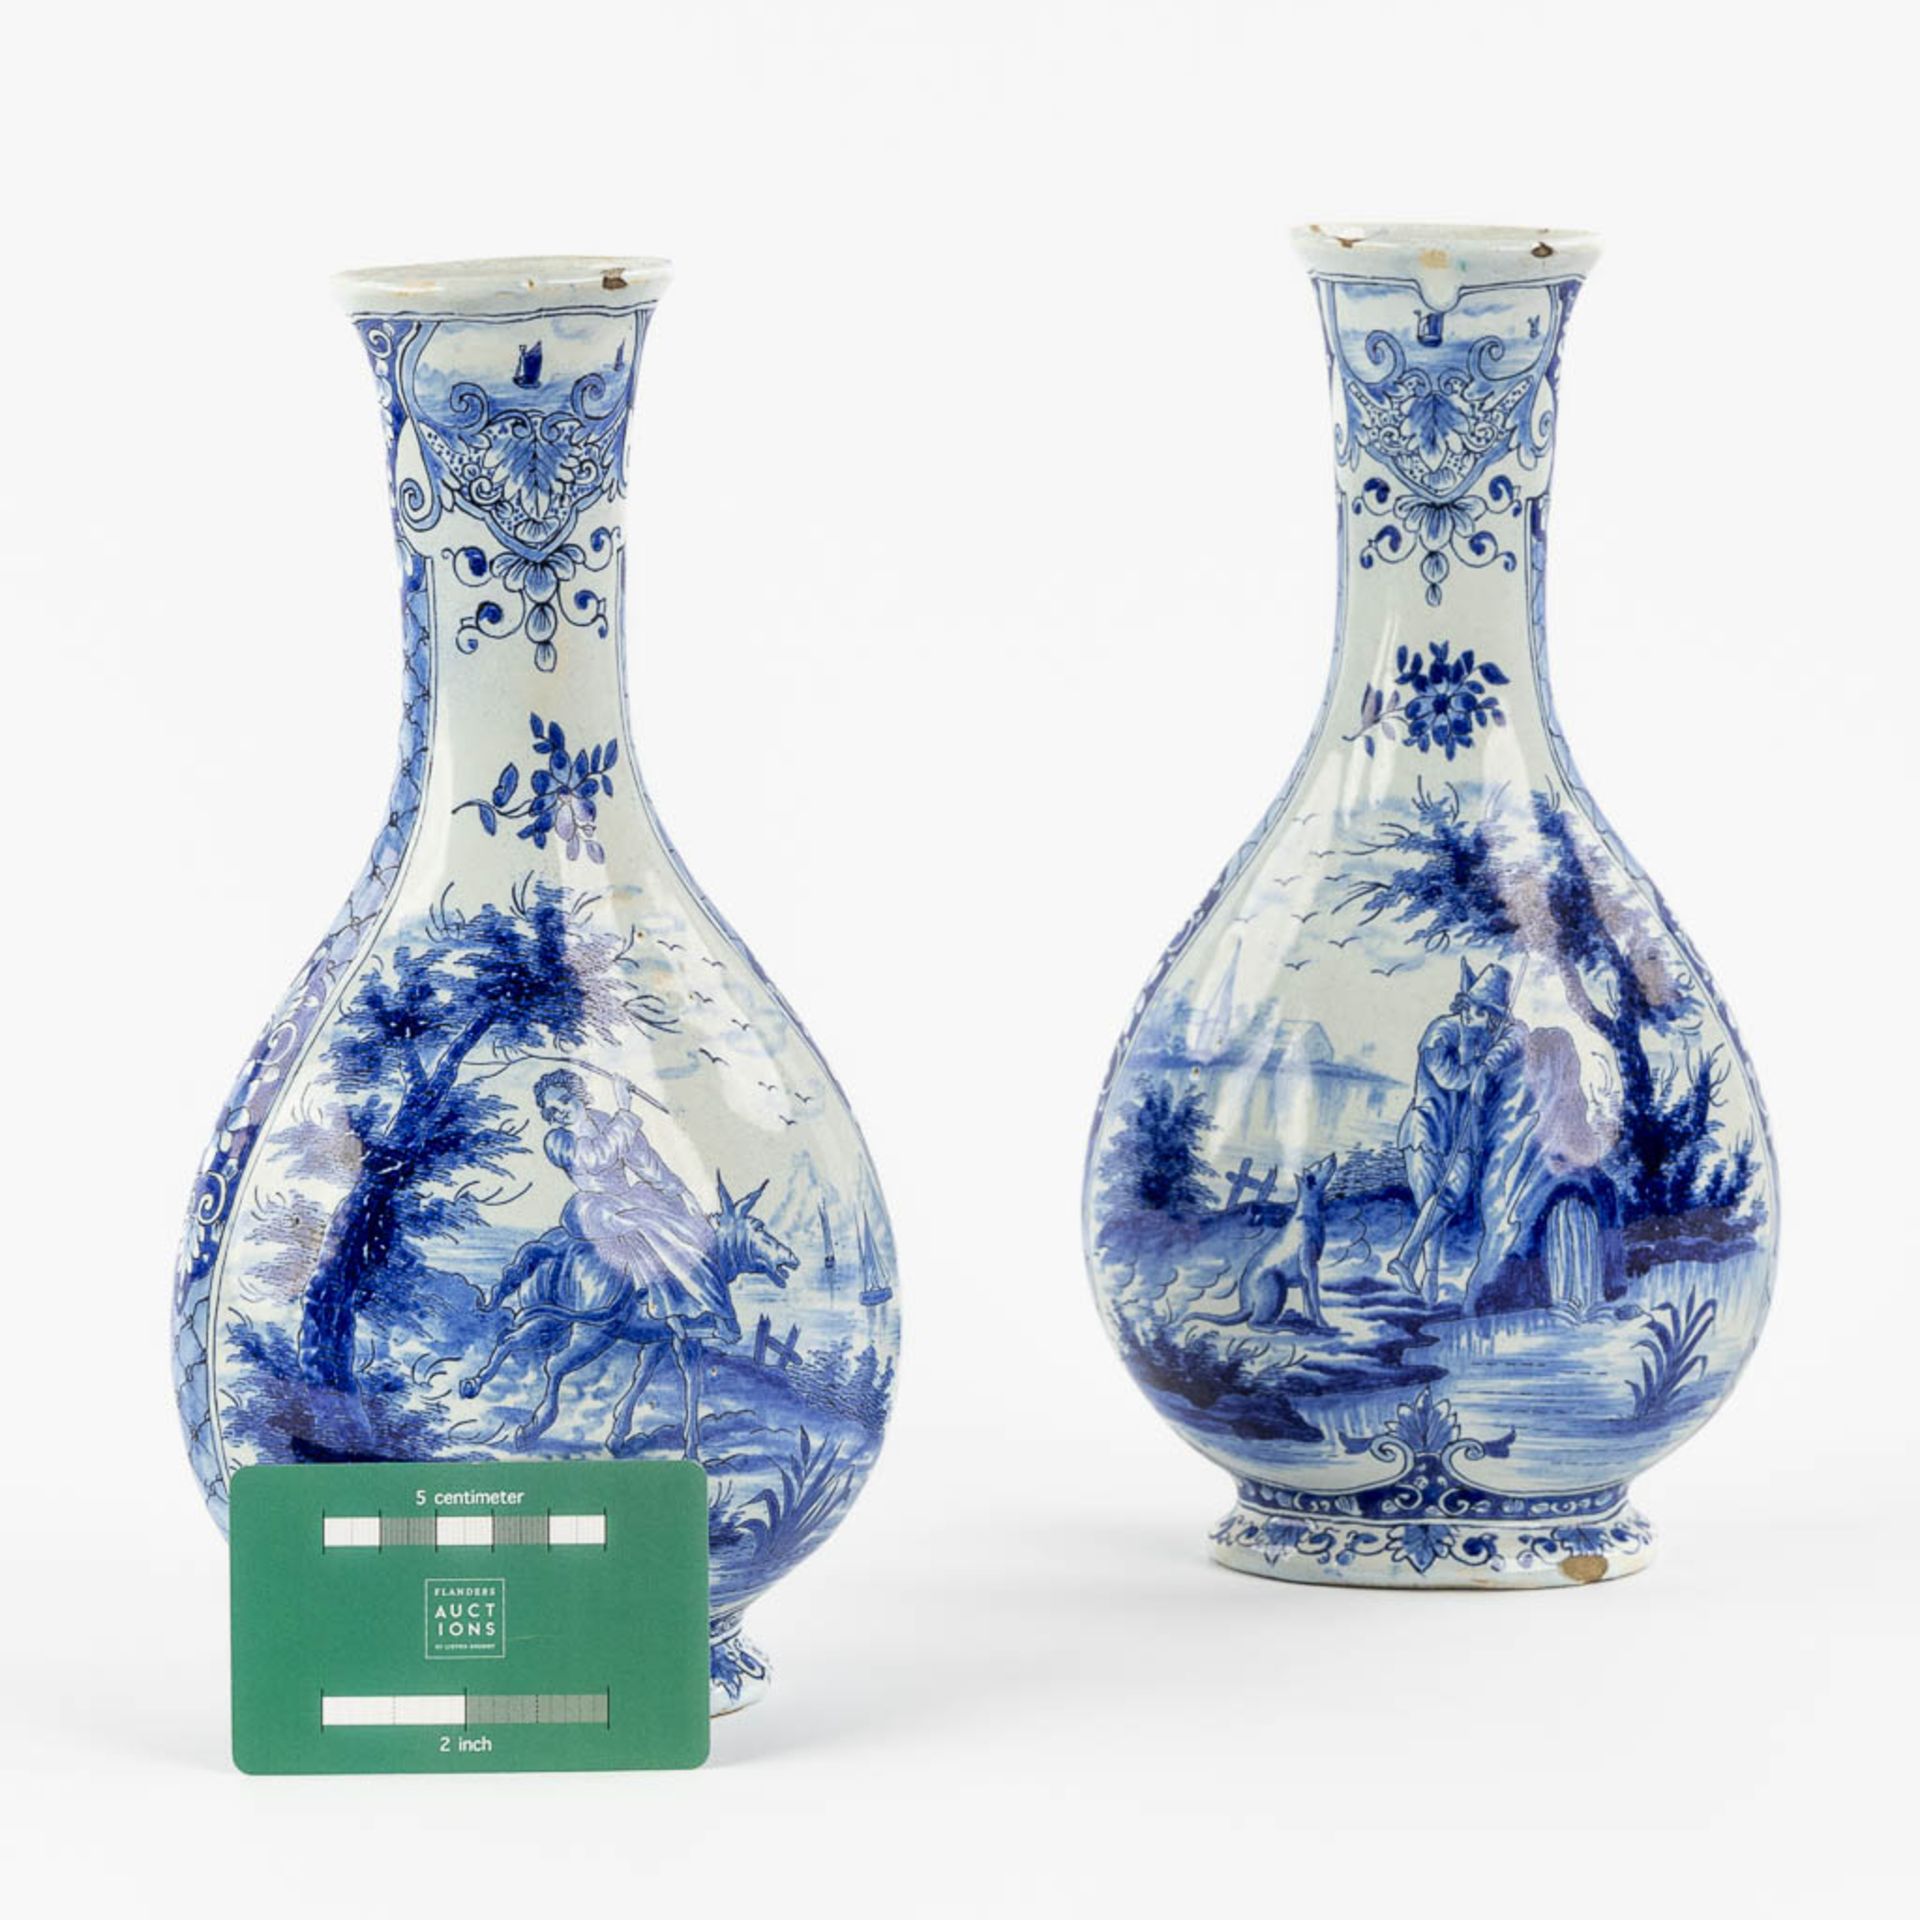 Geertrui Verstelle, Delft, a pair of vases with a landscape decor. Mid 18th C. (L:9 x W:14 x H:26,5 - Image 2 of 15